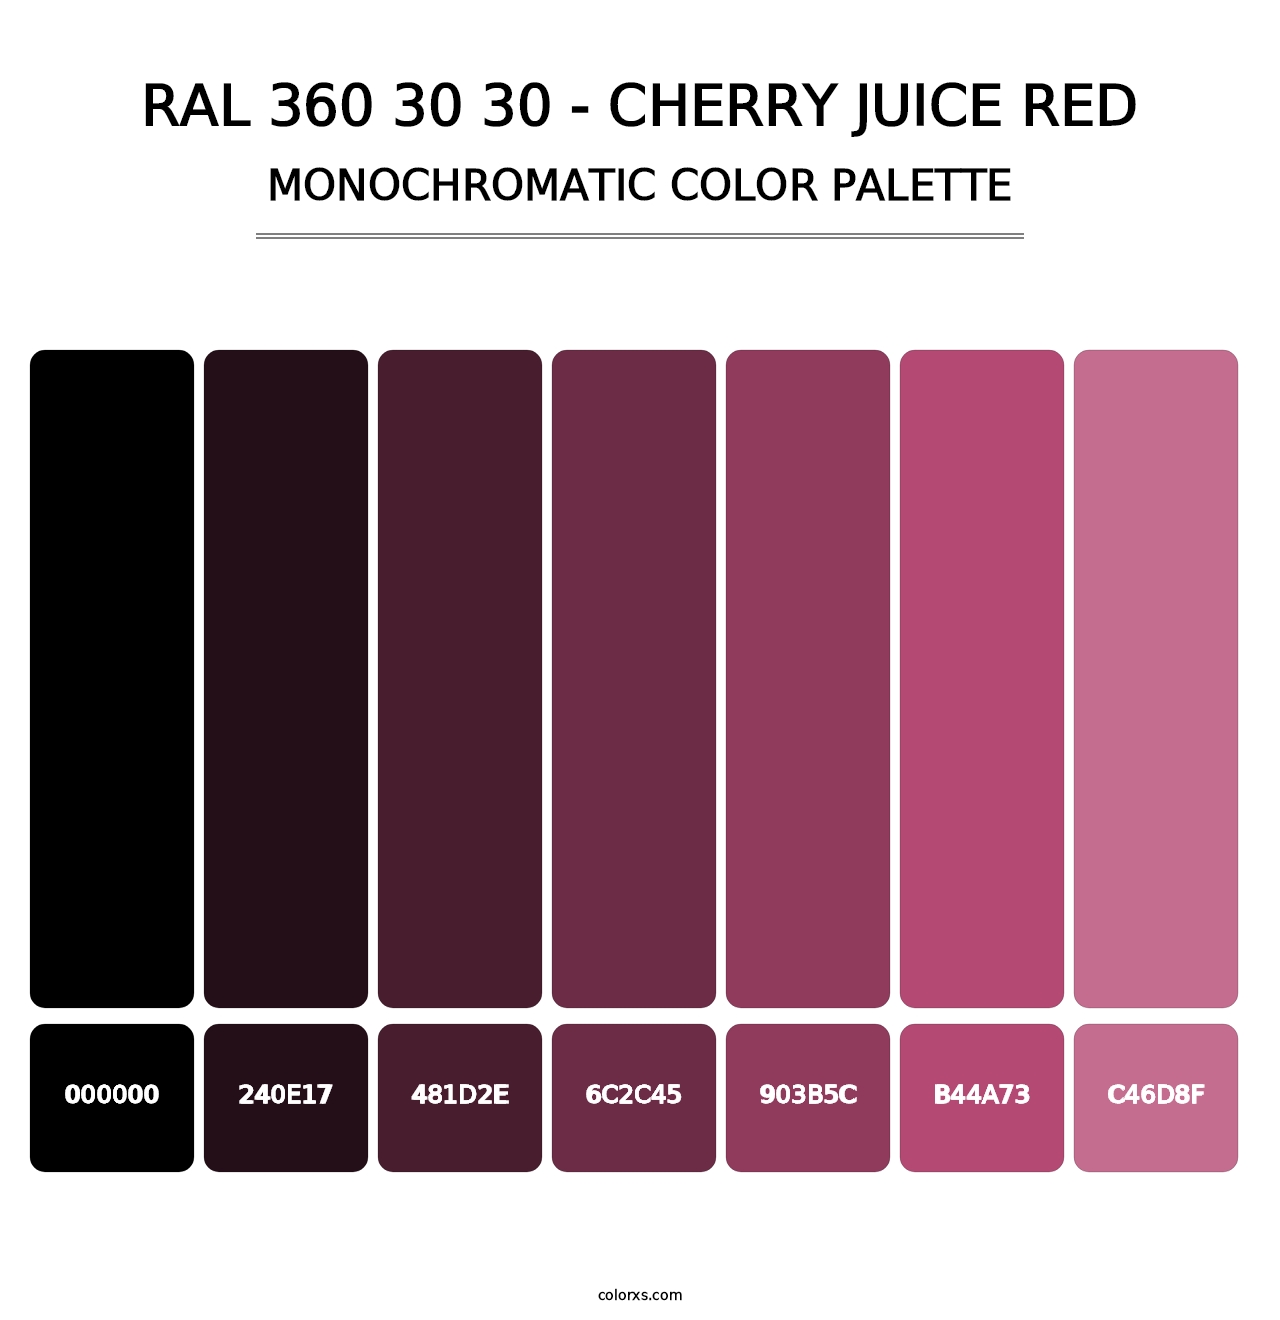 RAL 360 30 30 - Cherry Juice Red - Monochromatic Color Palette